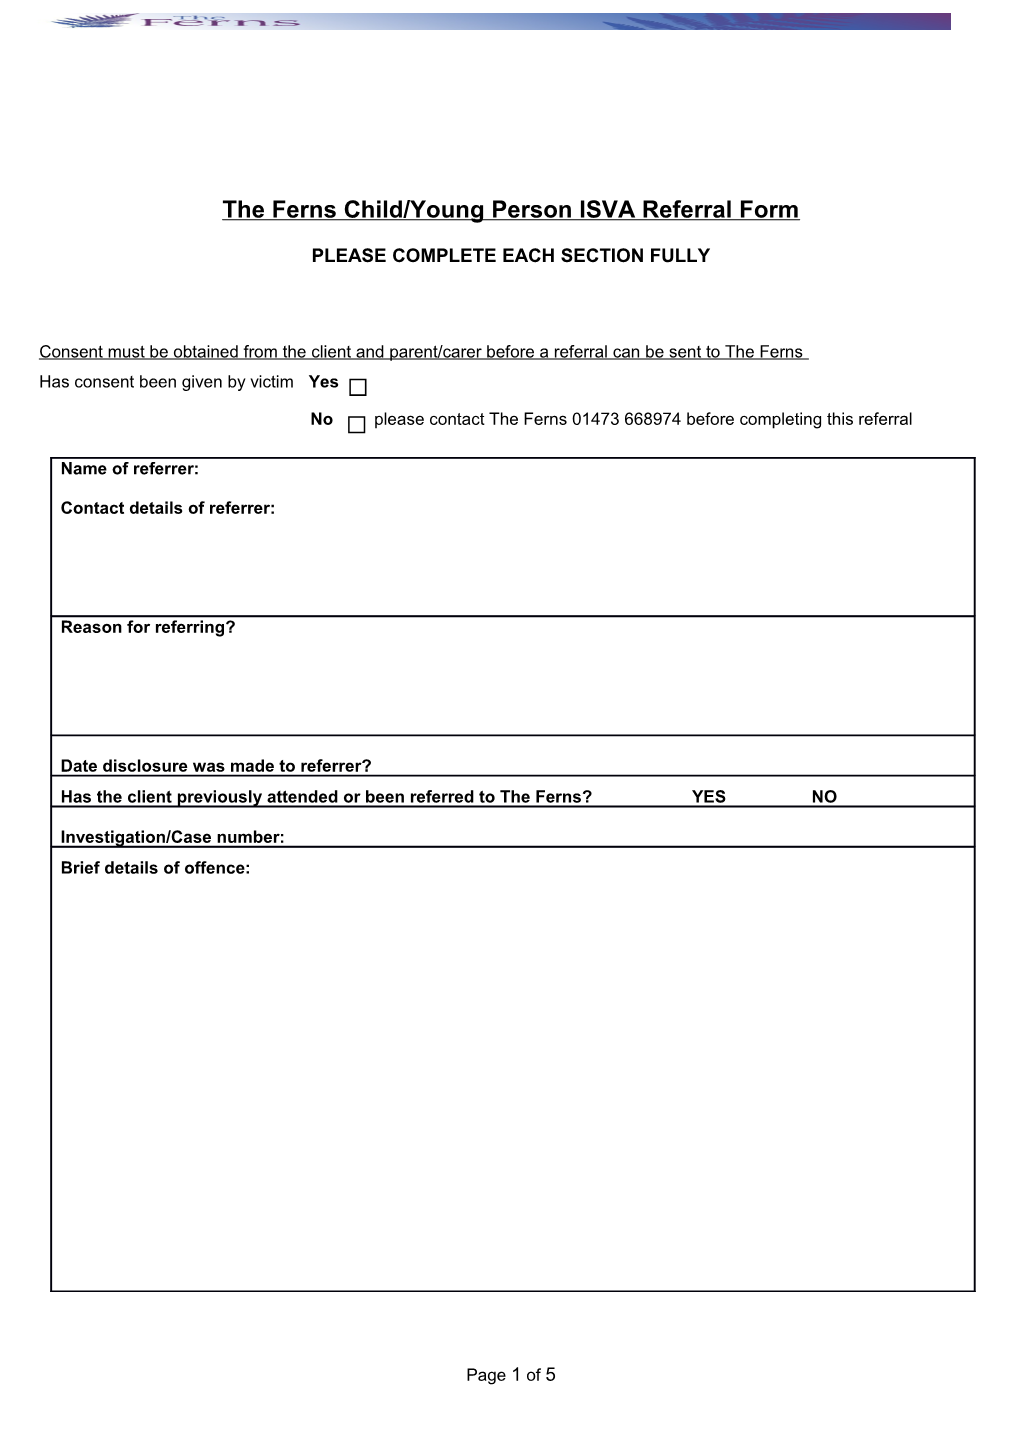 The Fernschild/Young Person ISVA Referral Form